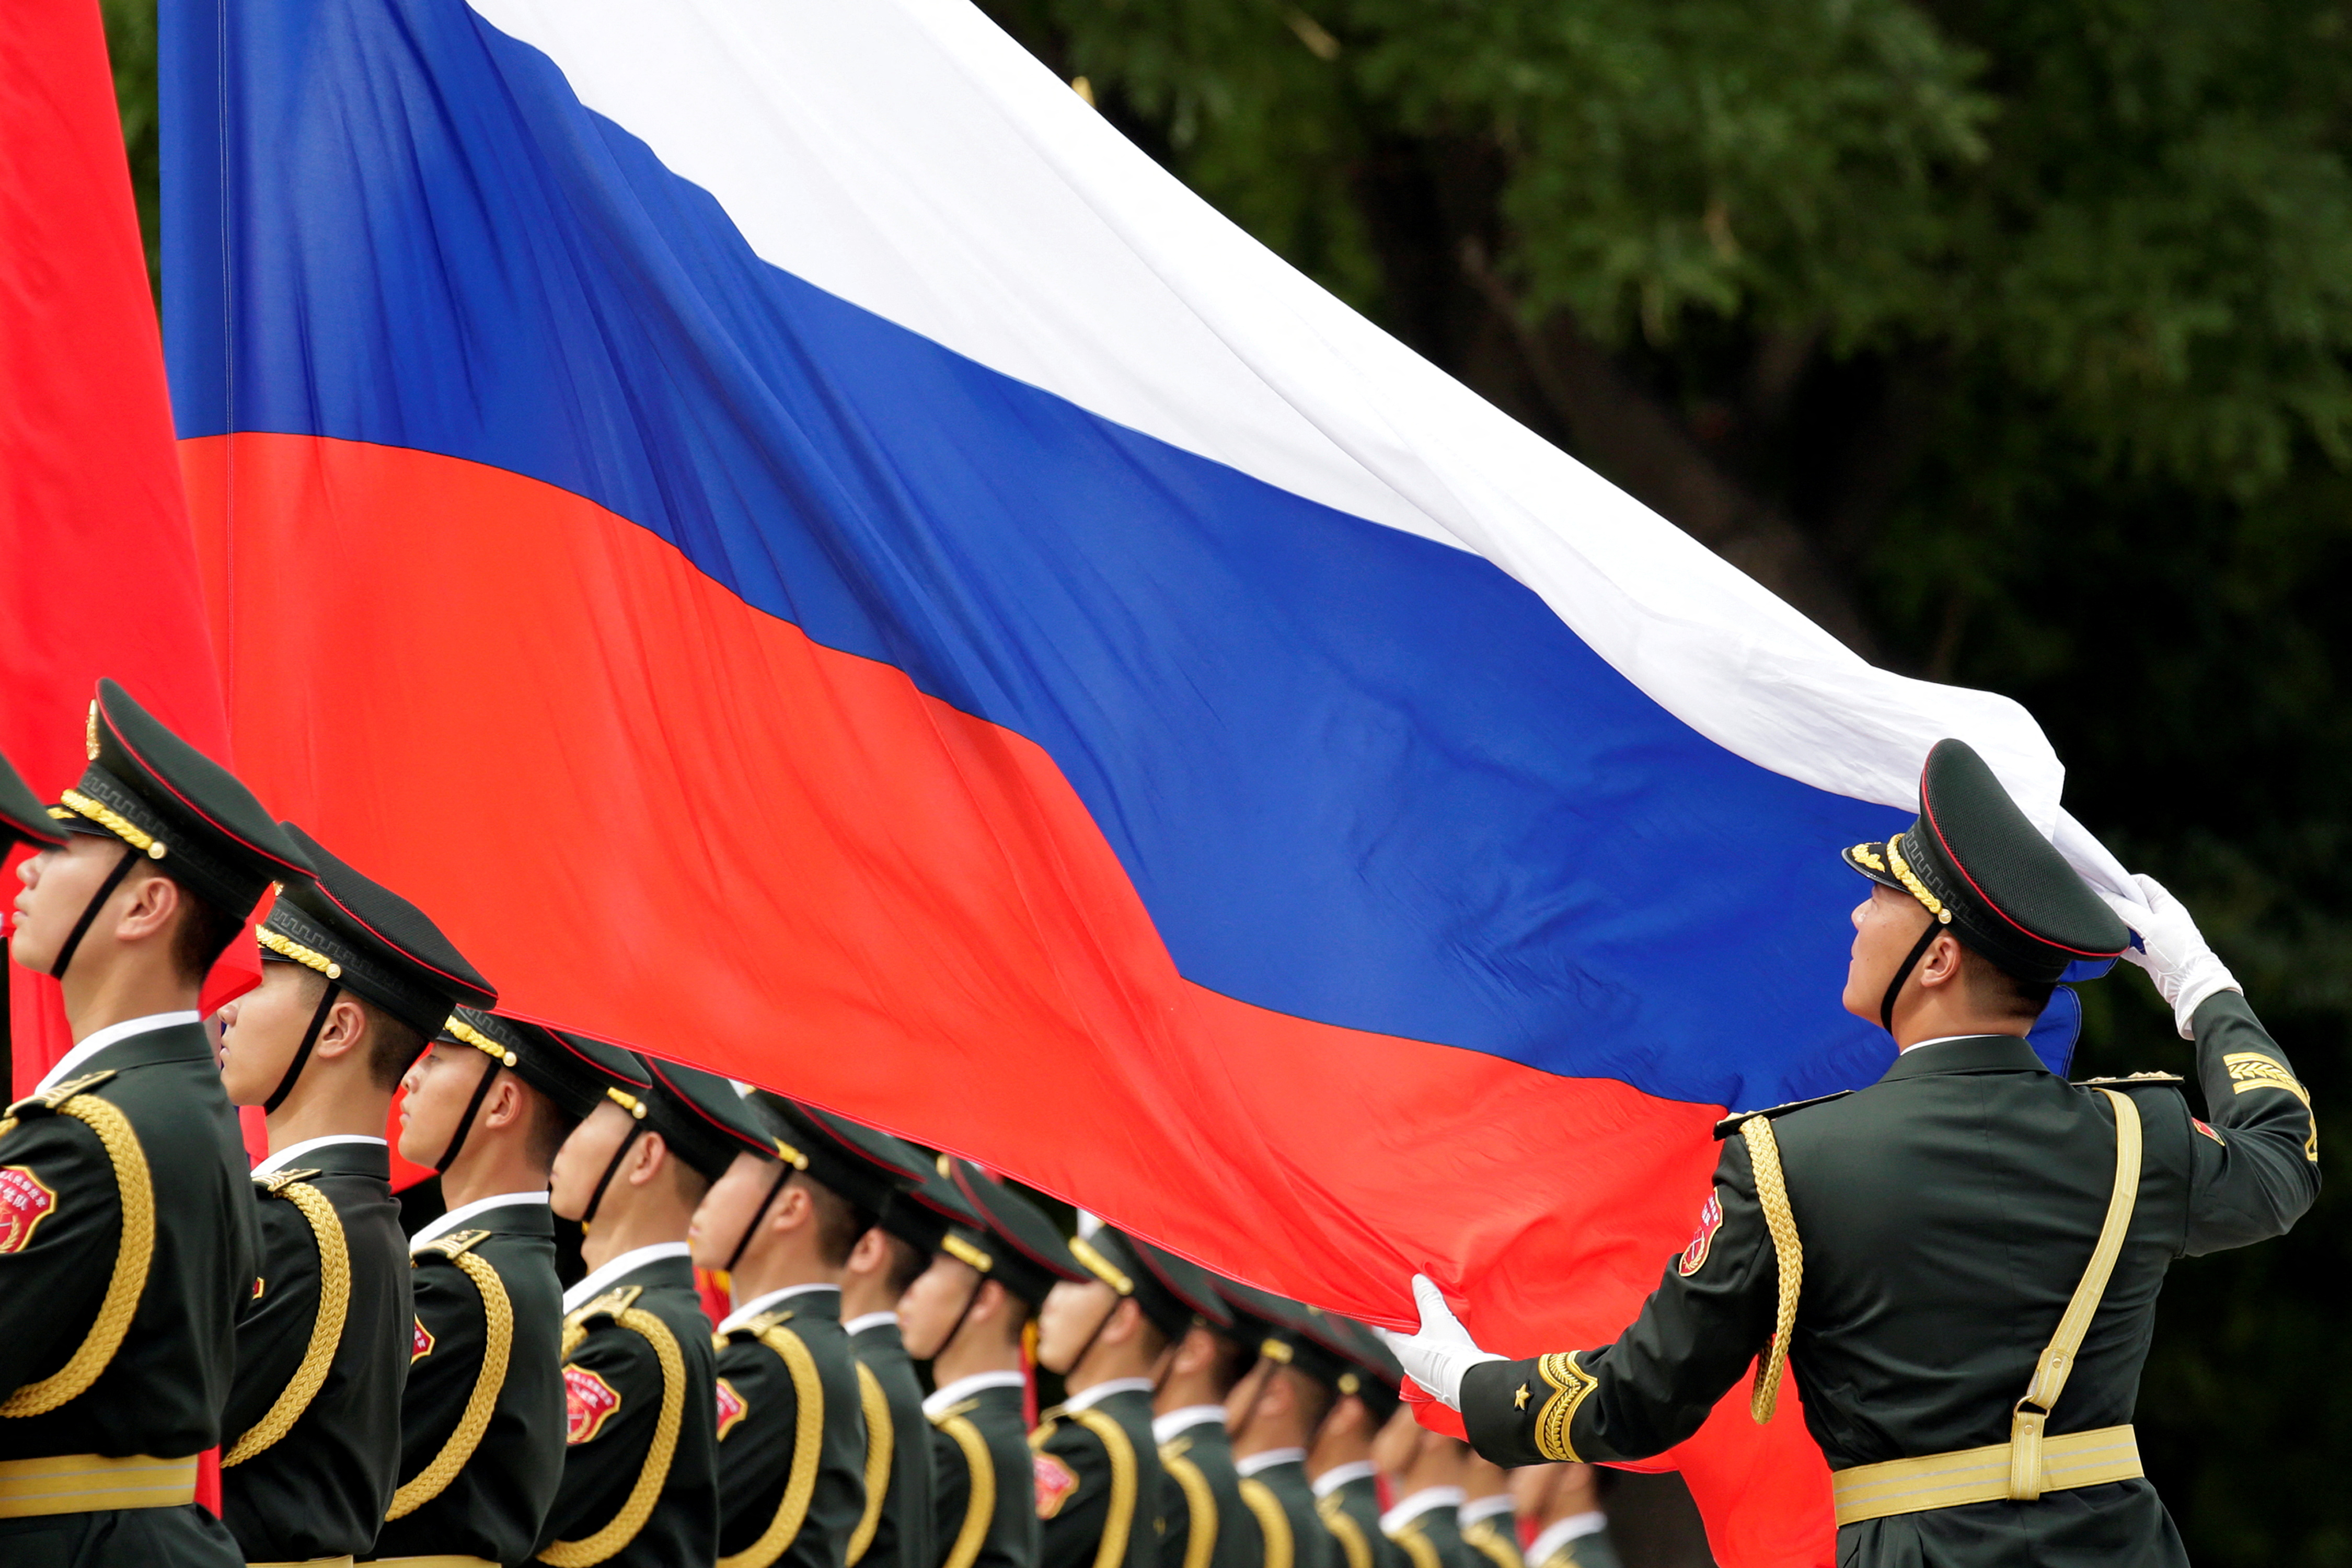 An honour guard holds a Russia flag during preparations for a welcome ceremony for Russian President Vladimir Putin outside the Great Hall of the People in Beijing, China